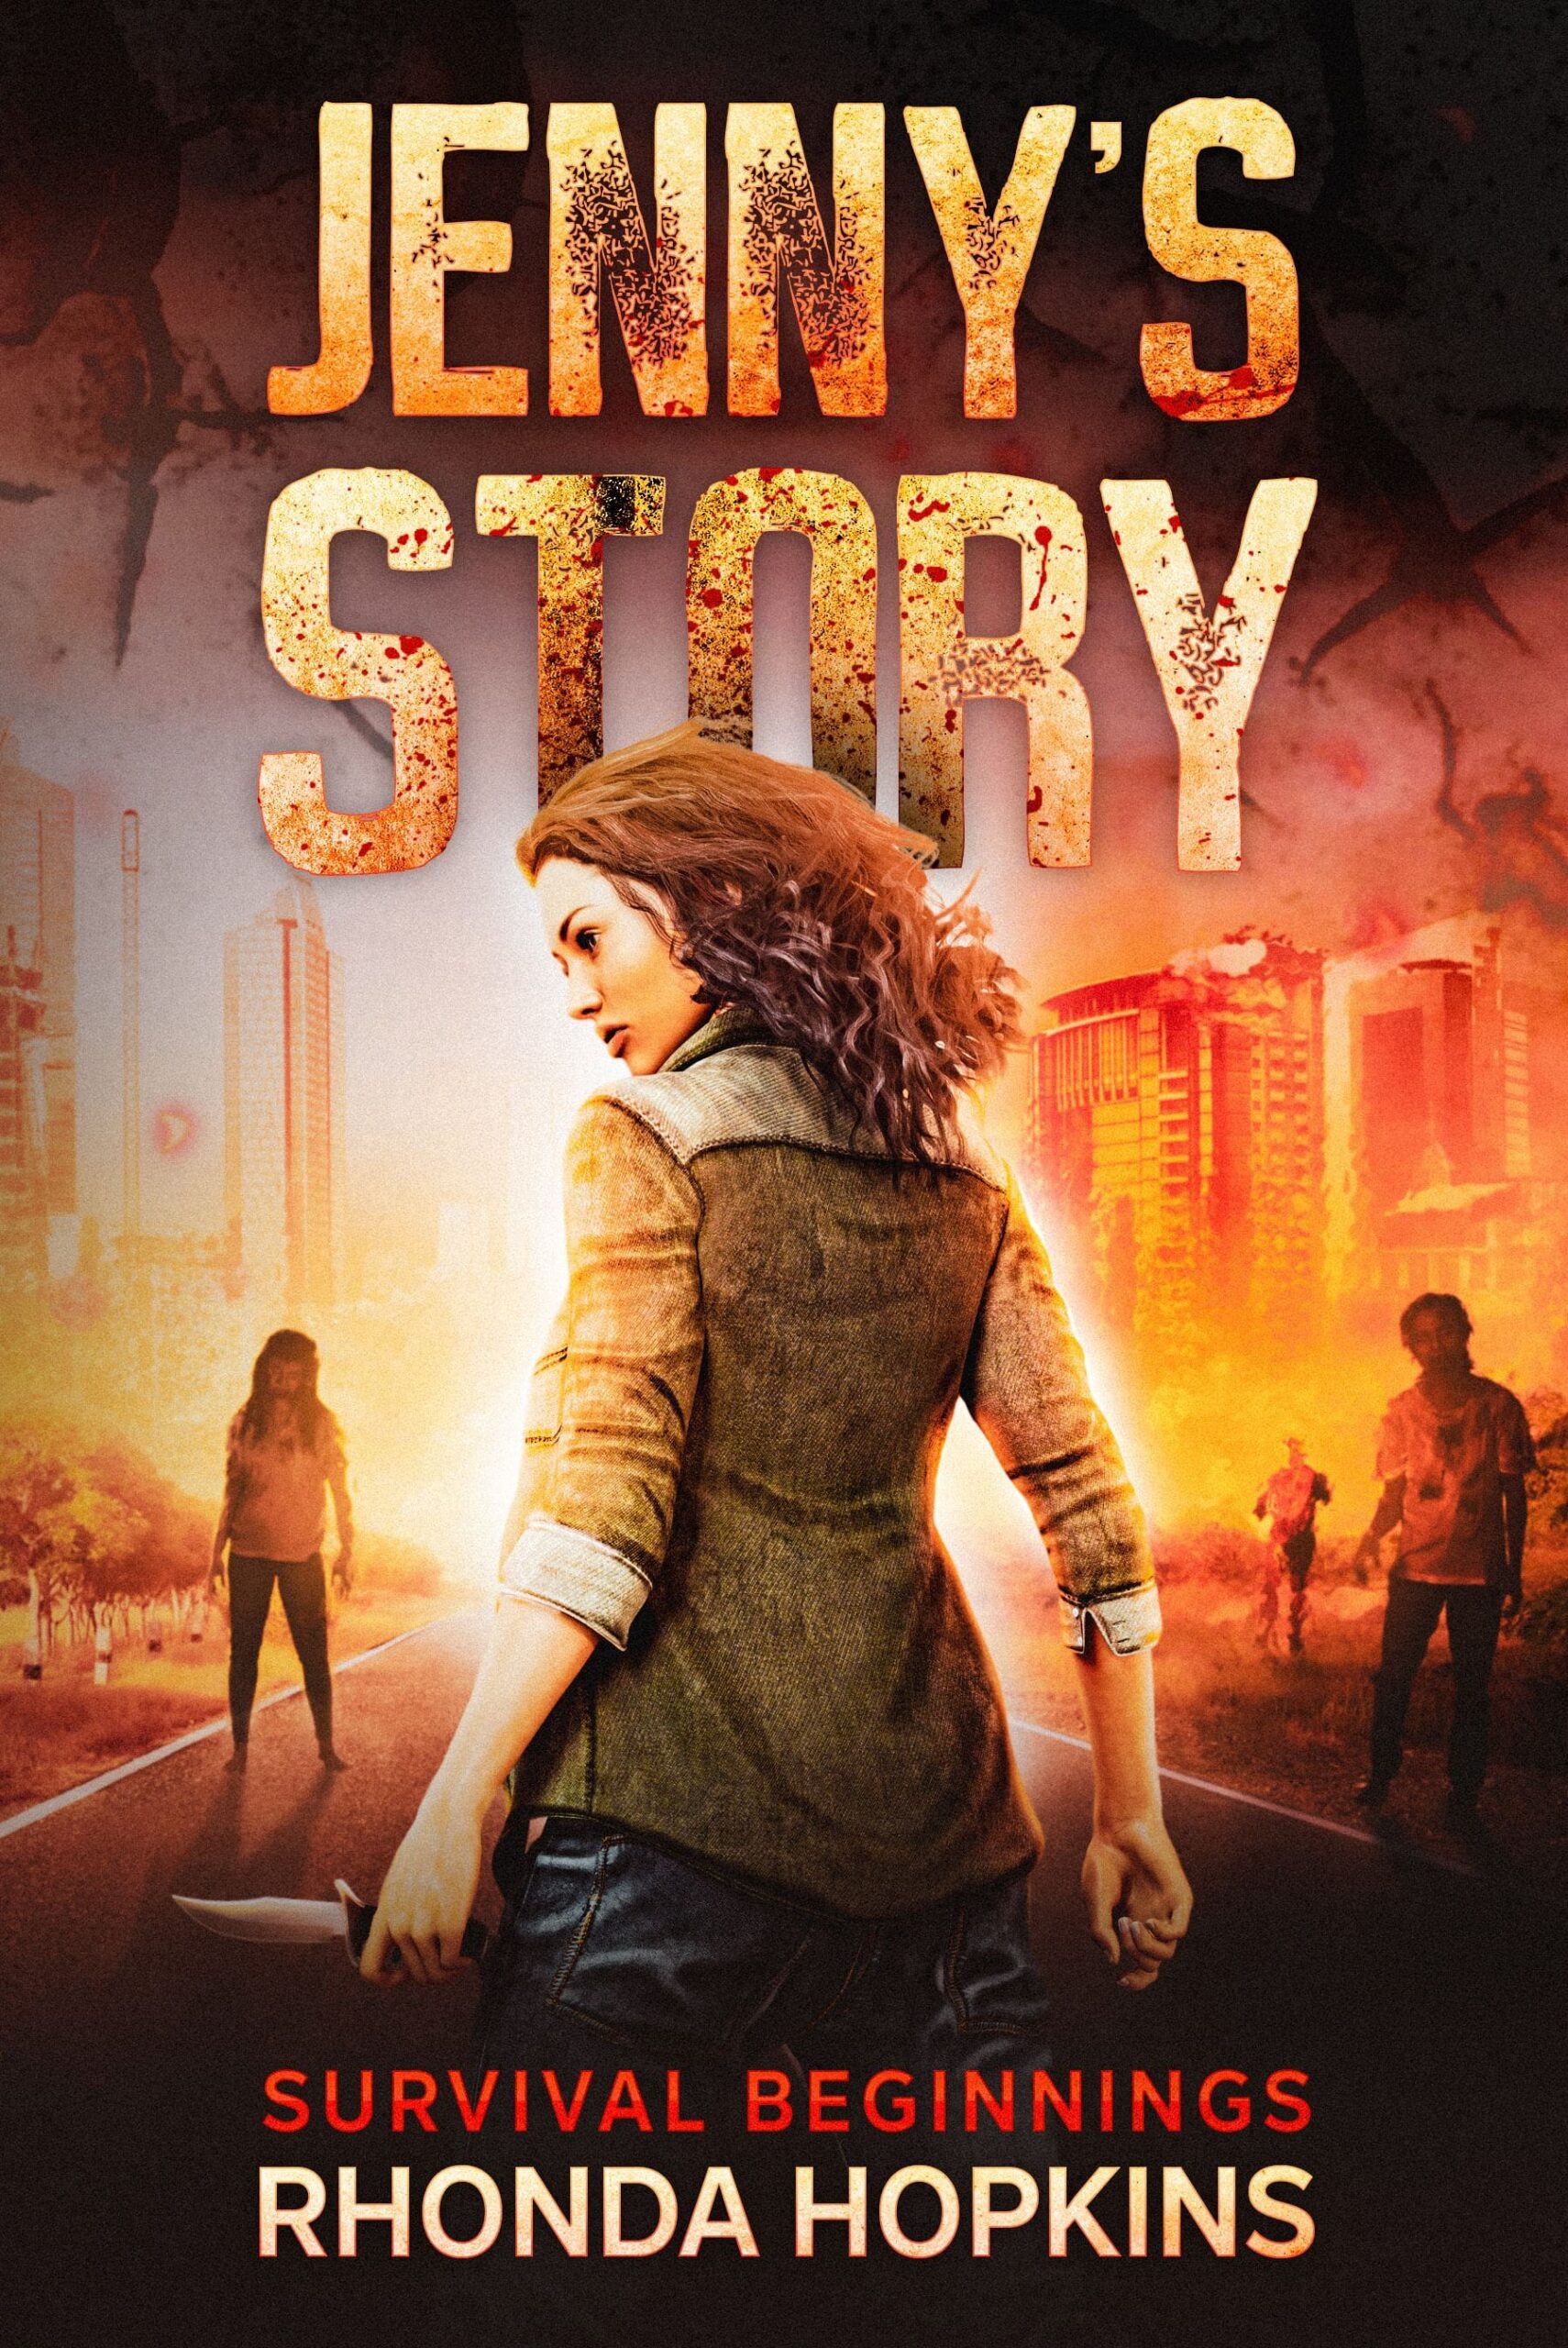 Jenny's Story: Survival Beginnings, by Rhonda Hopkins. A young woman with her back to the audience while facing a horde of zombies in a ruined city